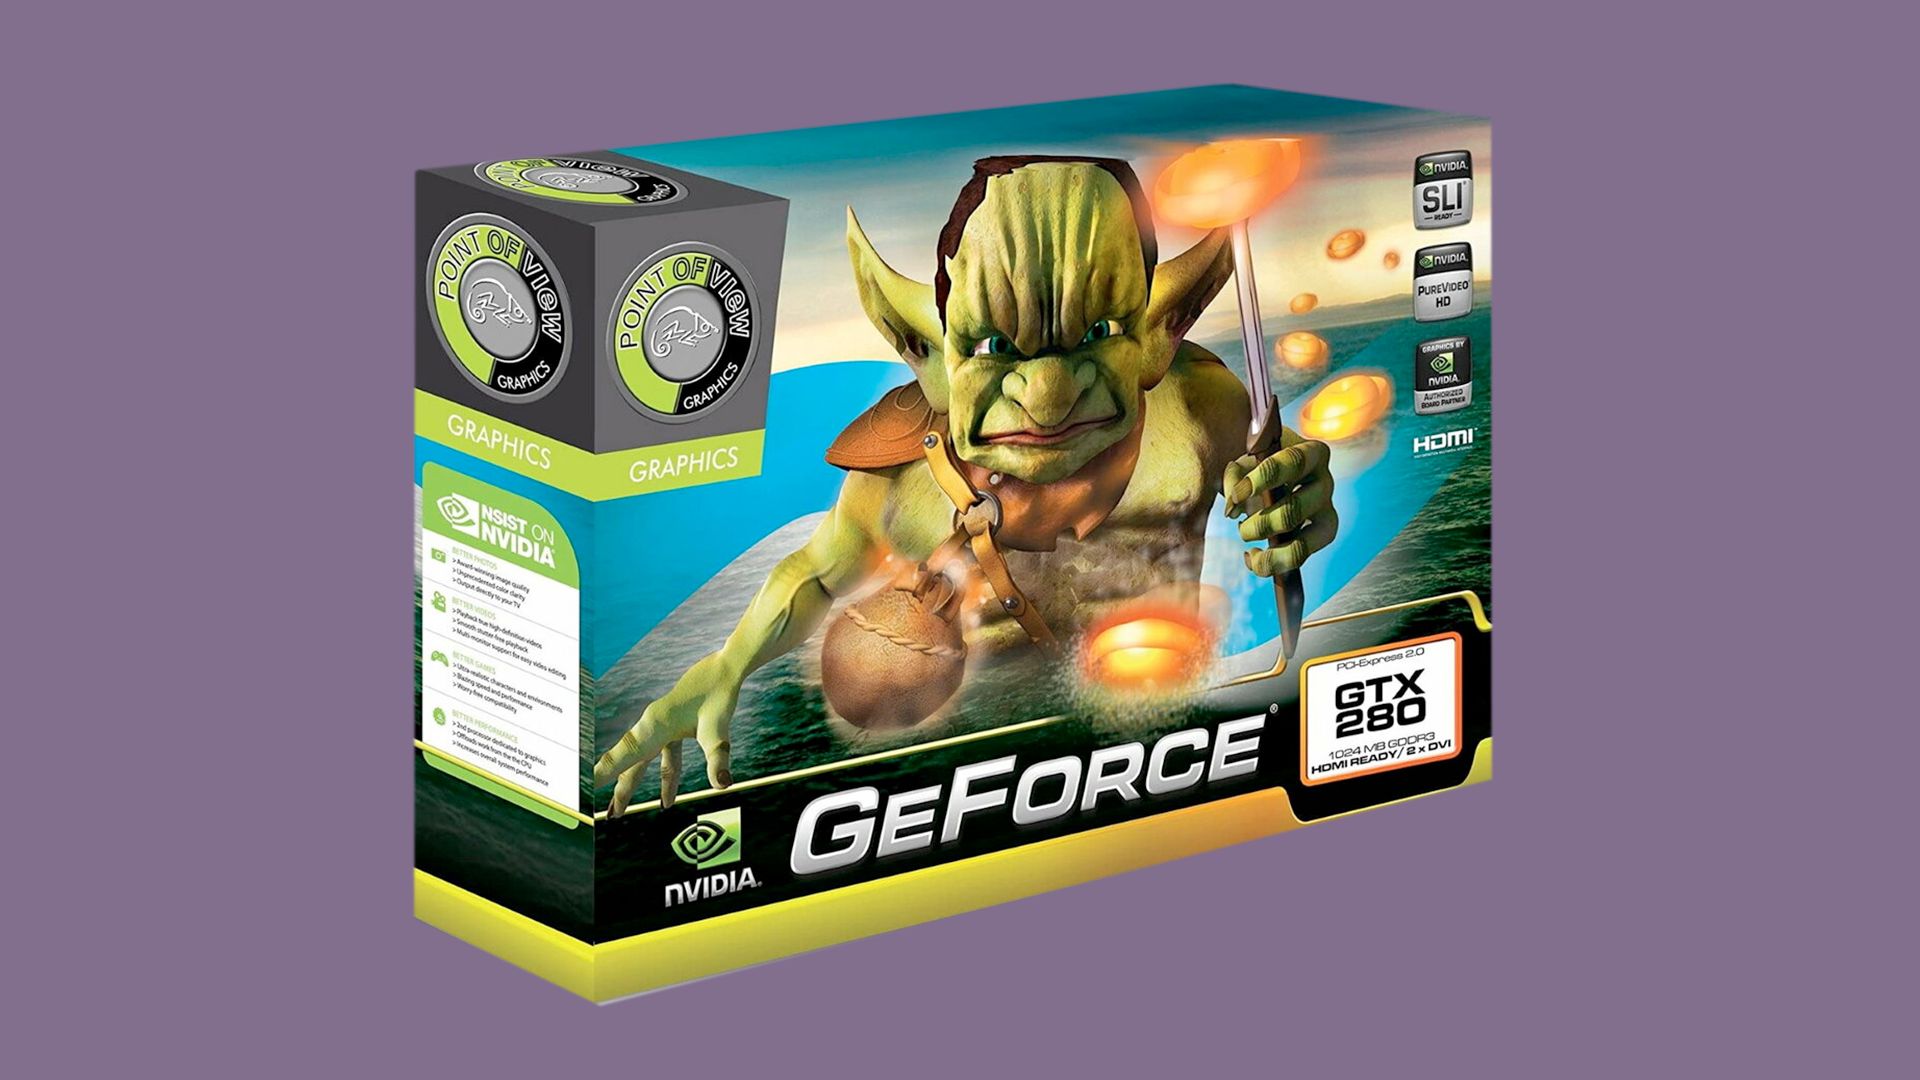 I Miss The Cursed Aesthetic Of Old Graphics Card Boxes